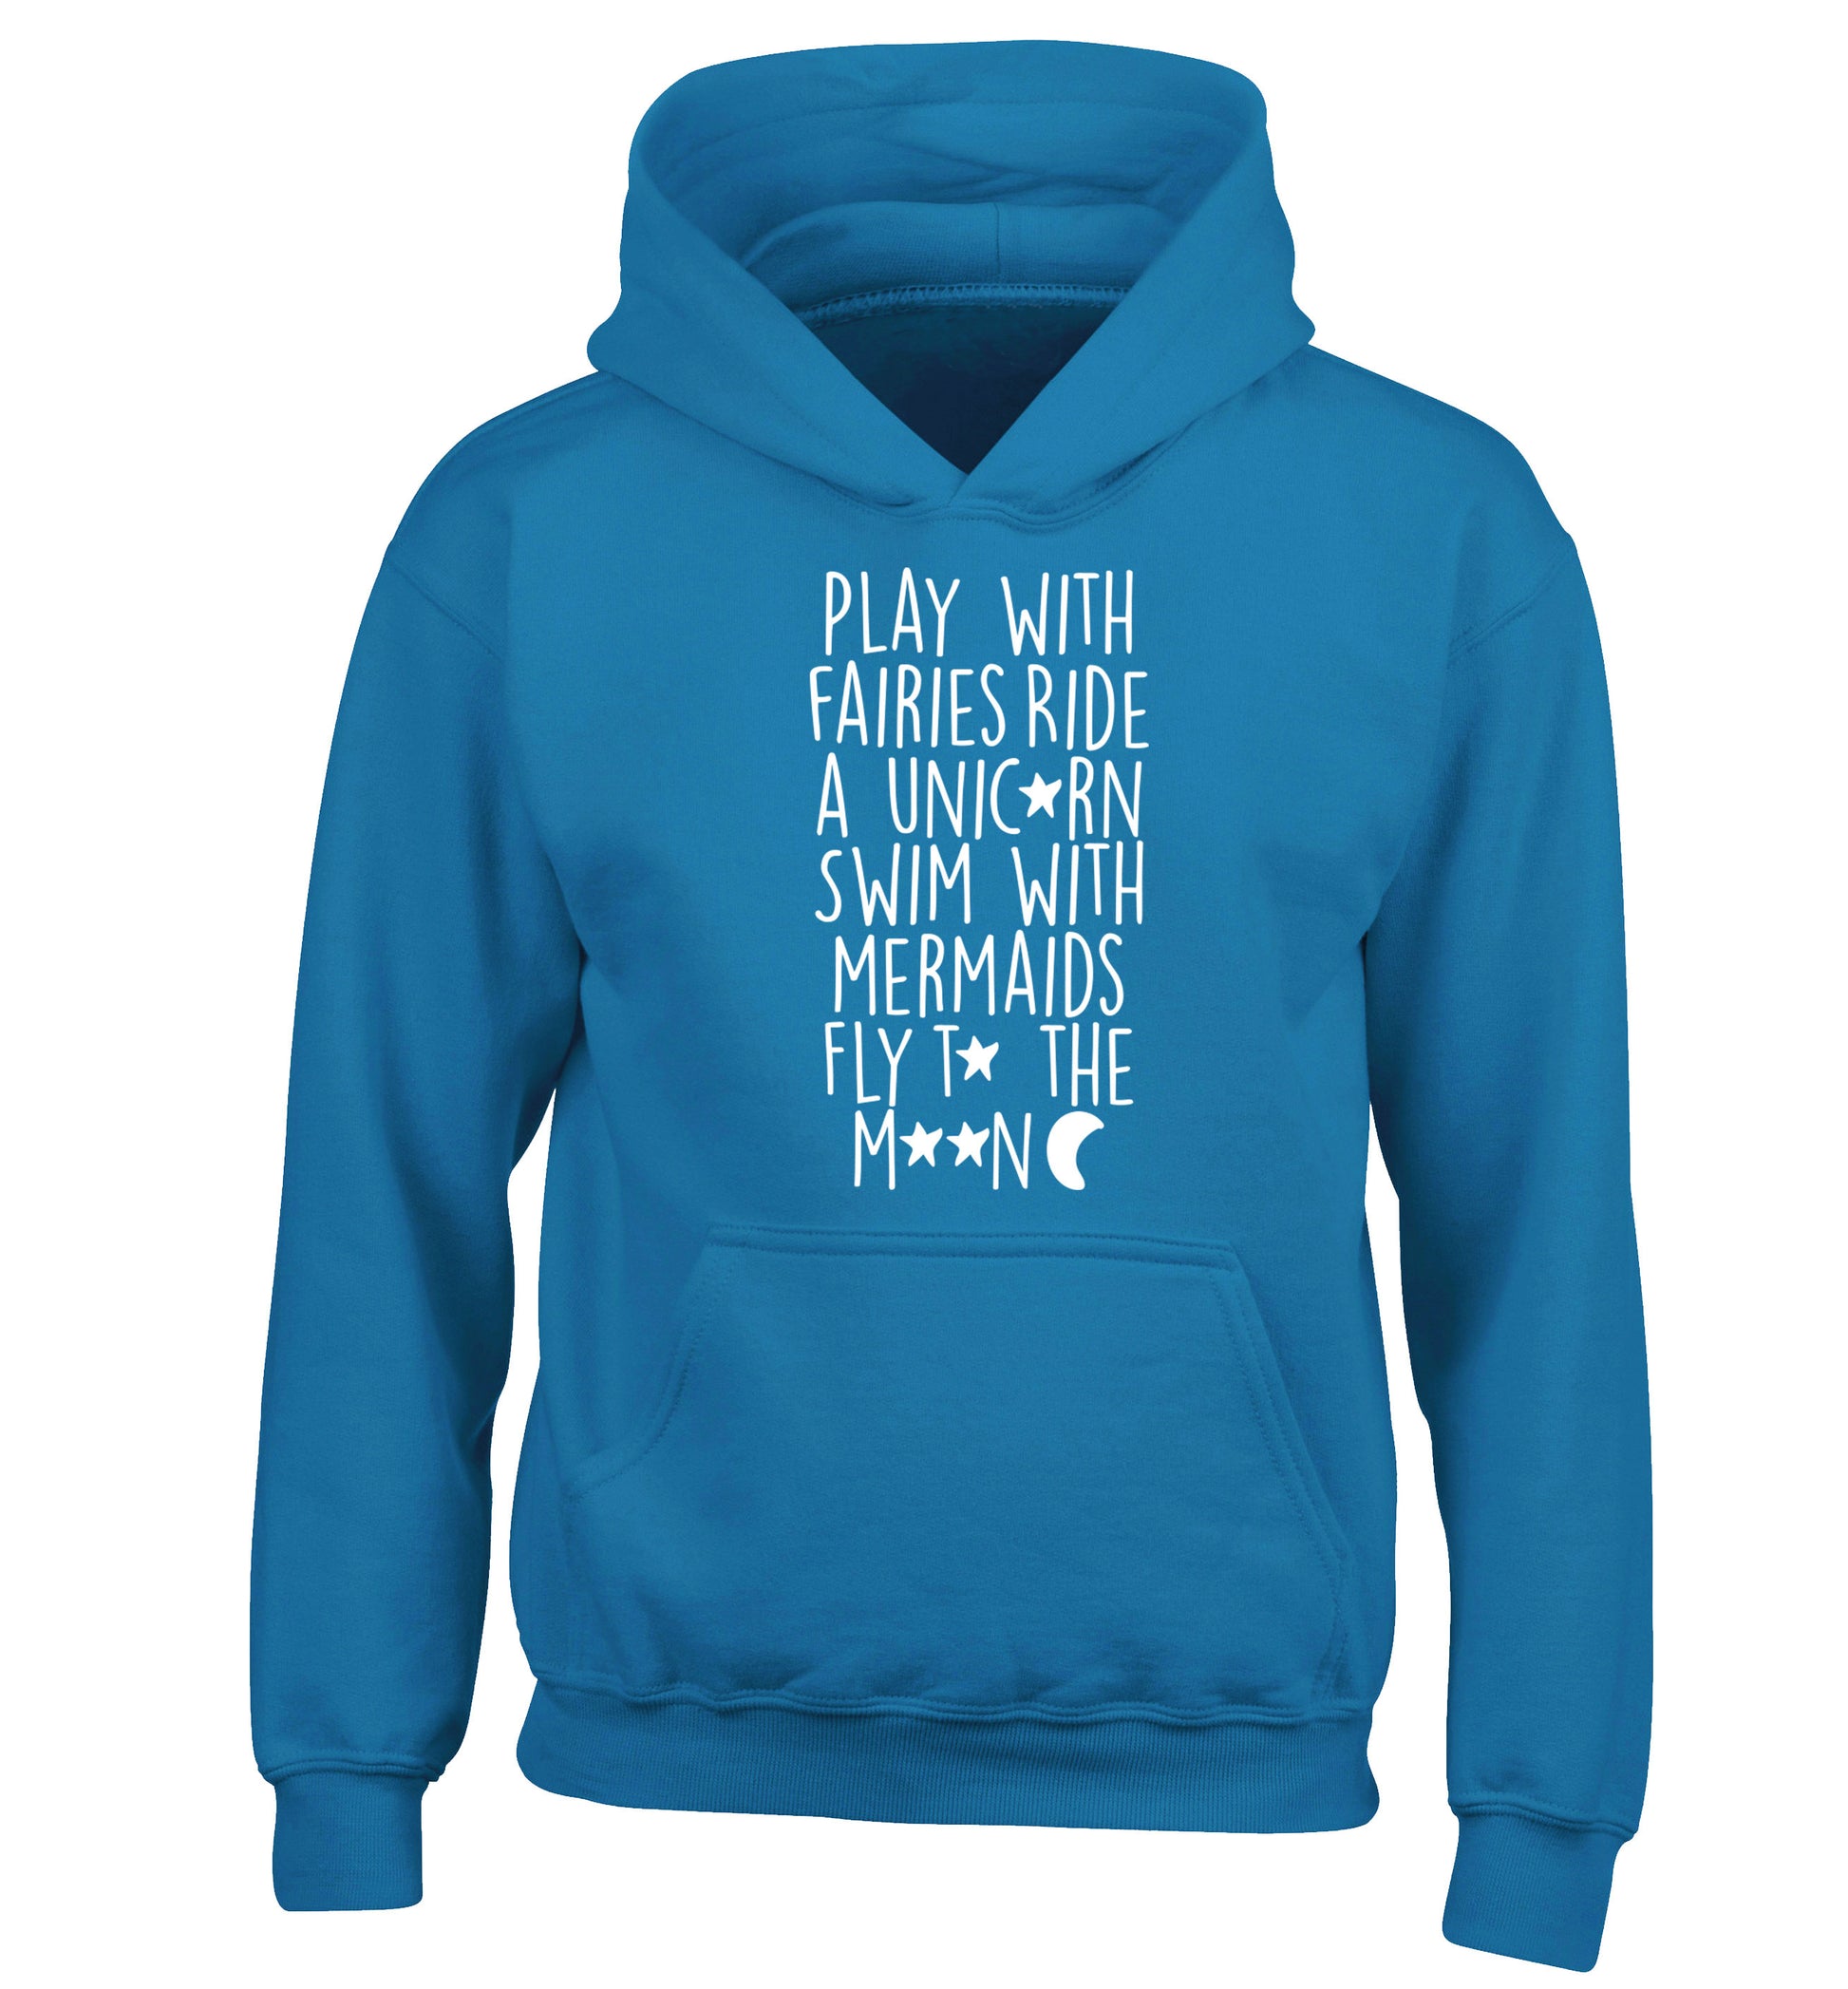 Play with fairies ride a unicorn swim with mermaids fly to the moon children's blue hoodie 12-14 Years